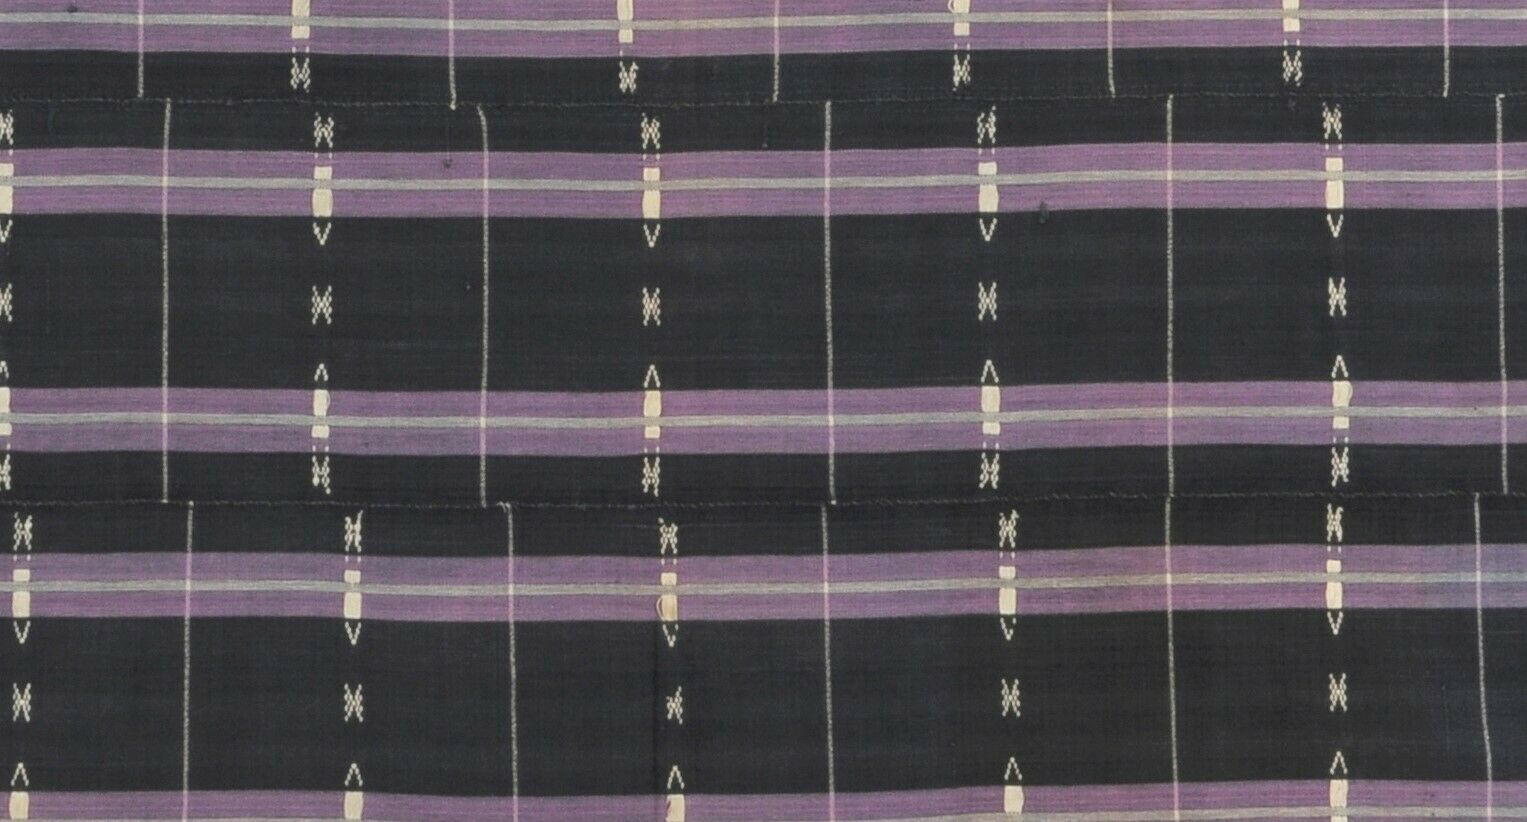 Baule Ivory Coast African hand woven cloth Ethnic textile home decoration - Tribalgh